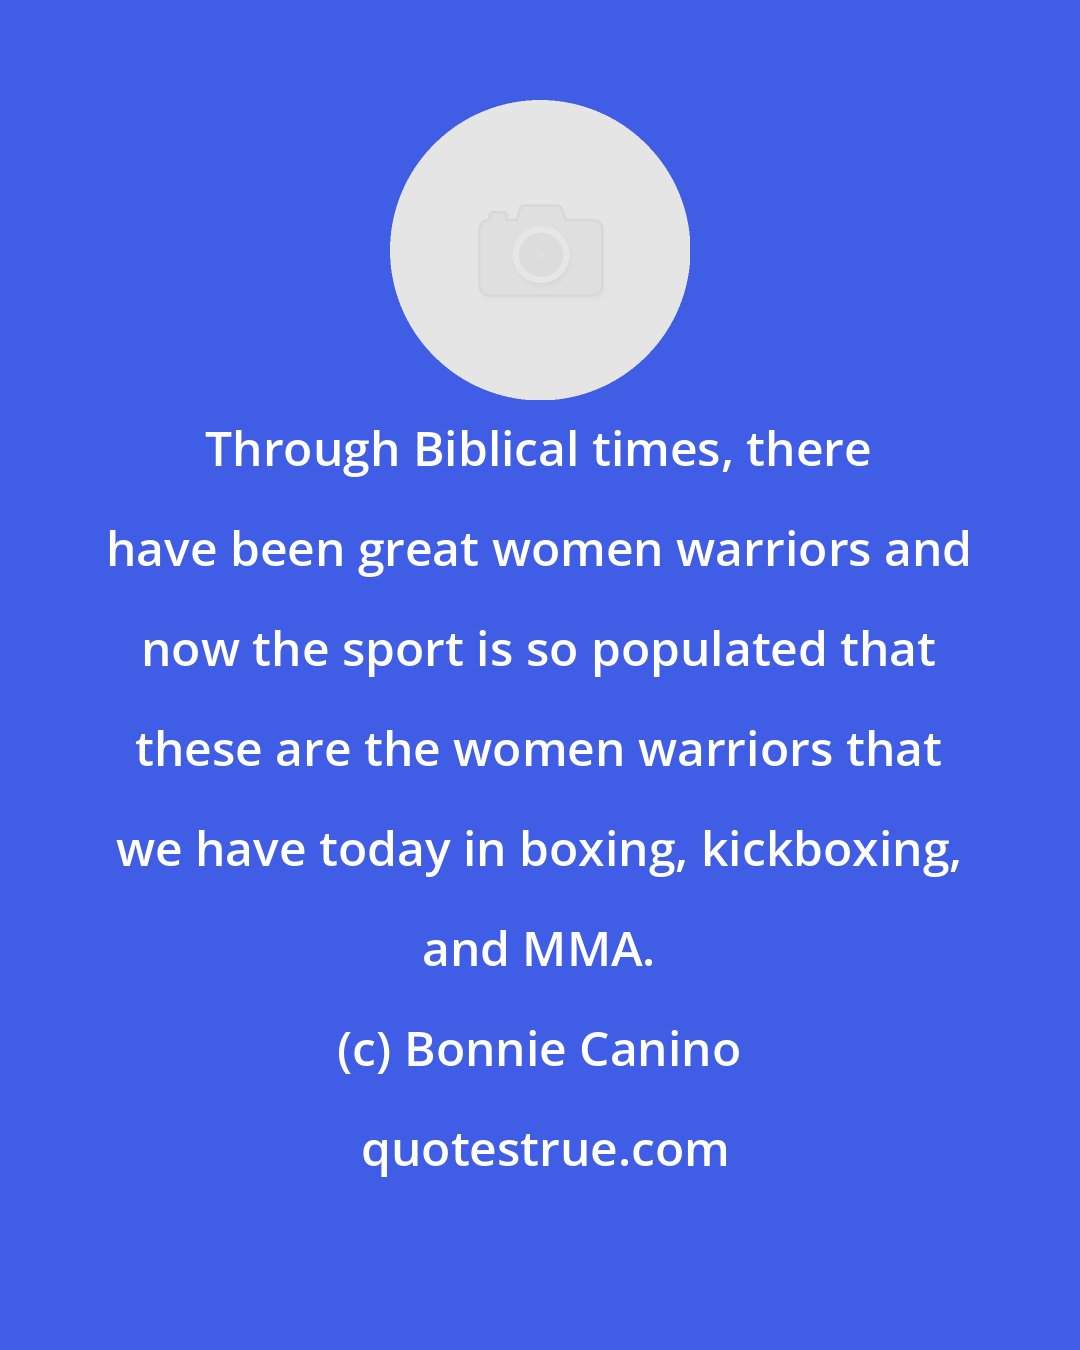 Bonnie Canino: Through Biblical times, there have been great women warriors and now the sport is so populated that these are the women warriors that we have today in boxing, kickboxing, and MMA.